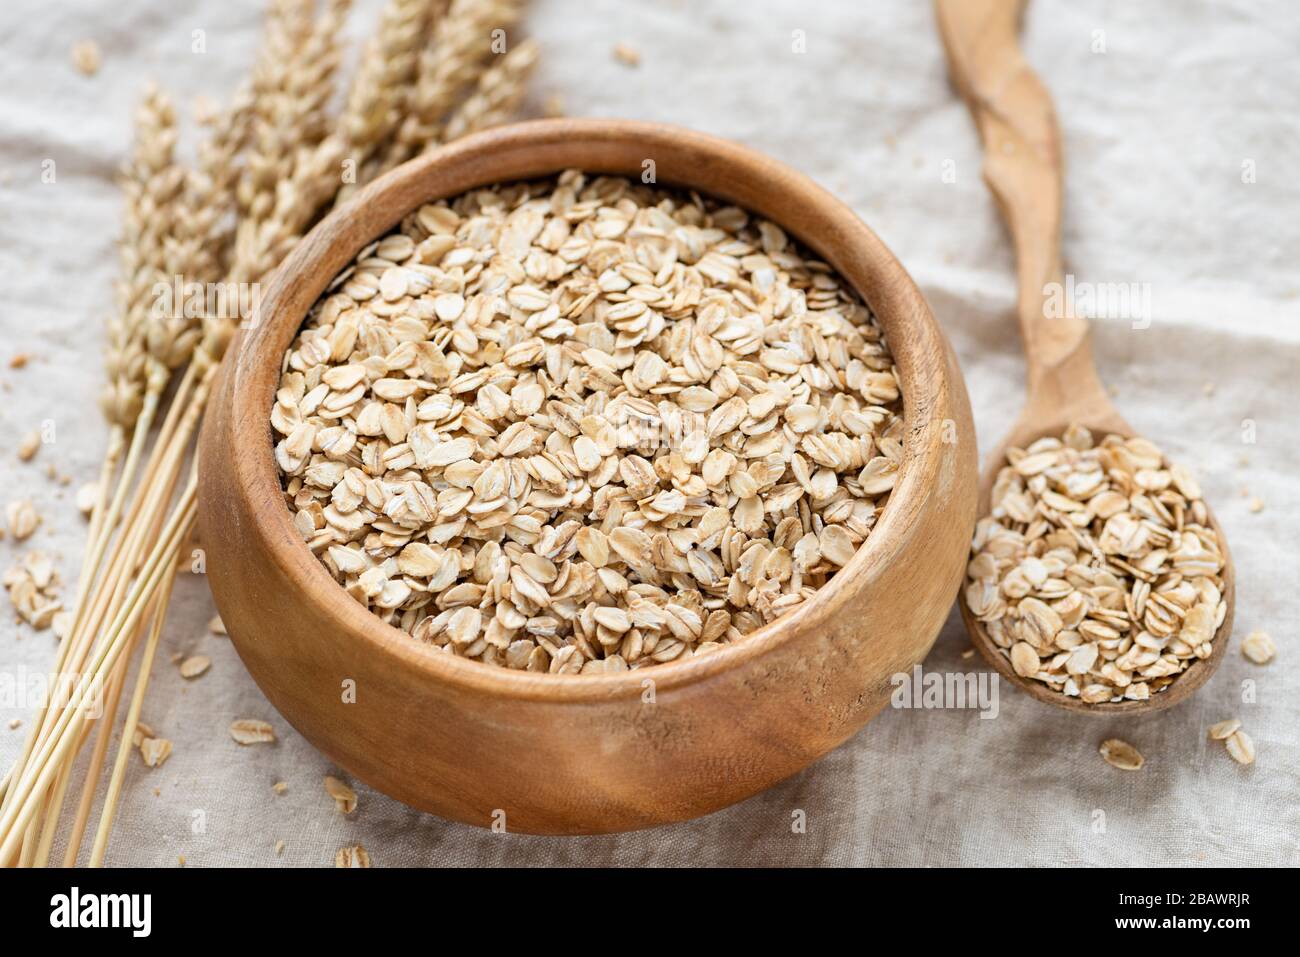 Rolled oats in wooden bowl on linen background. Healthy food, clean eating concept. Breakfast food uncooked oatmeal Stock Photo